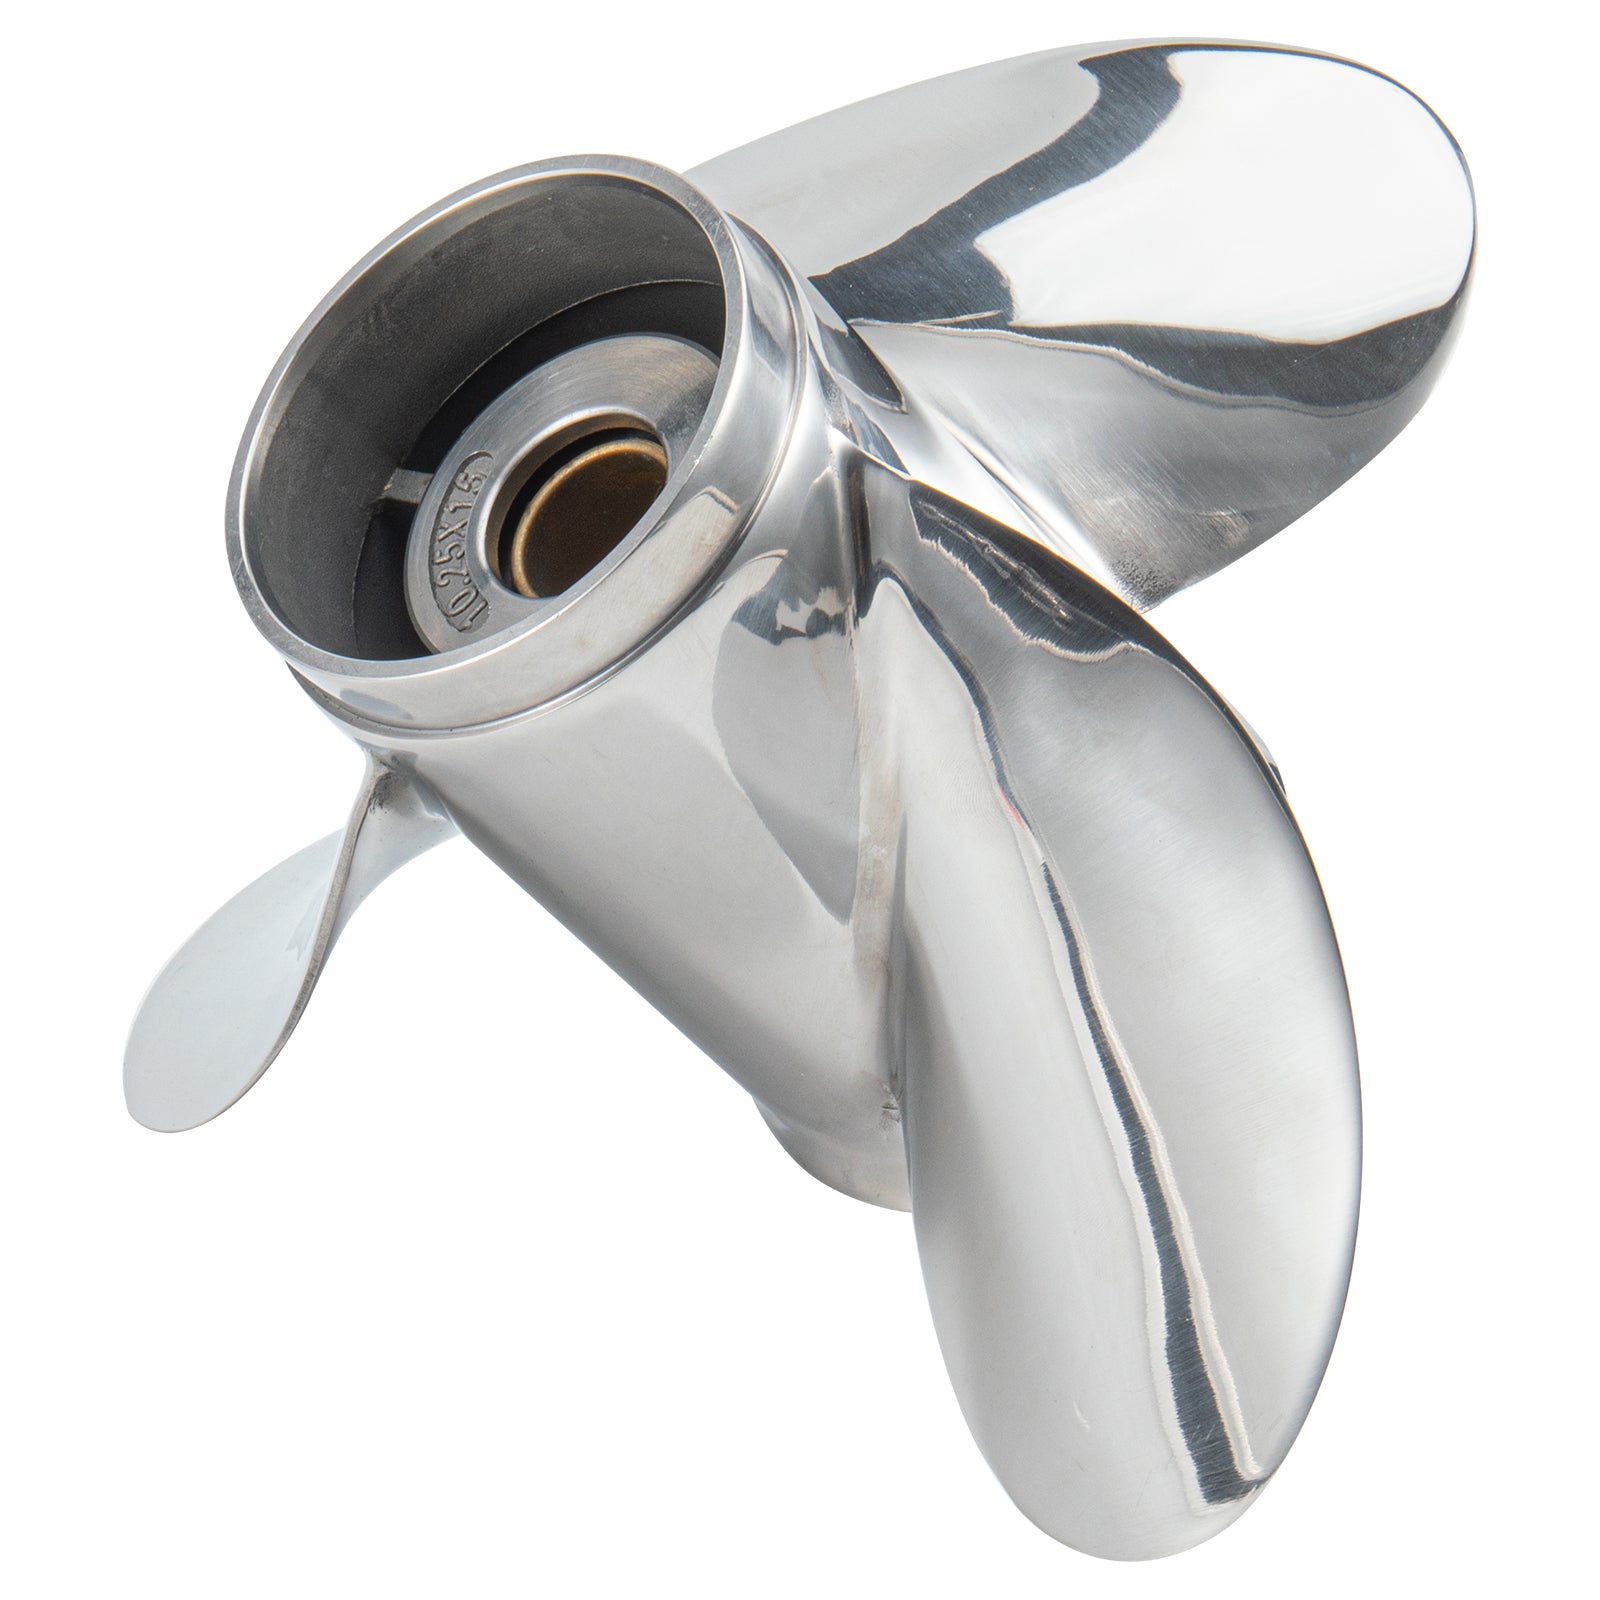 OEM Upgrade  10.25 x 15 Veageance Quicksilver Style Propeller, Parts No. 48-855862A46, for Mercury Outboard 25-70 HP ,13 Spline Tooth,RH